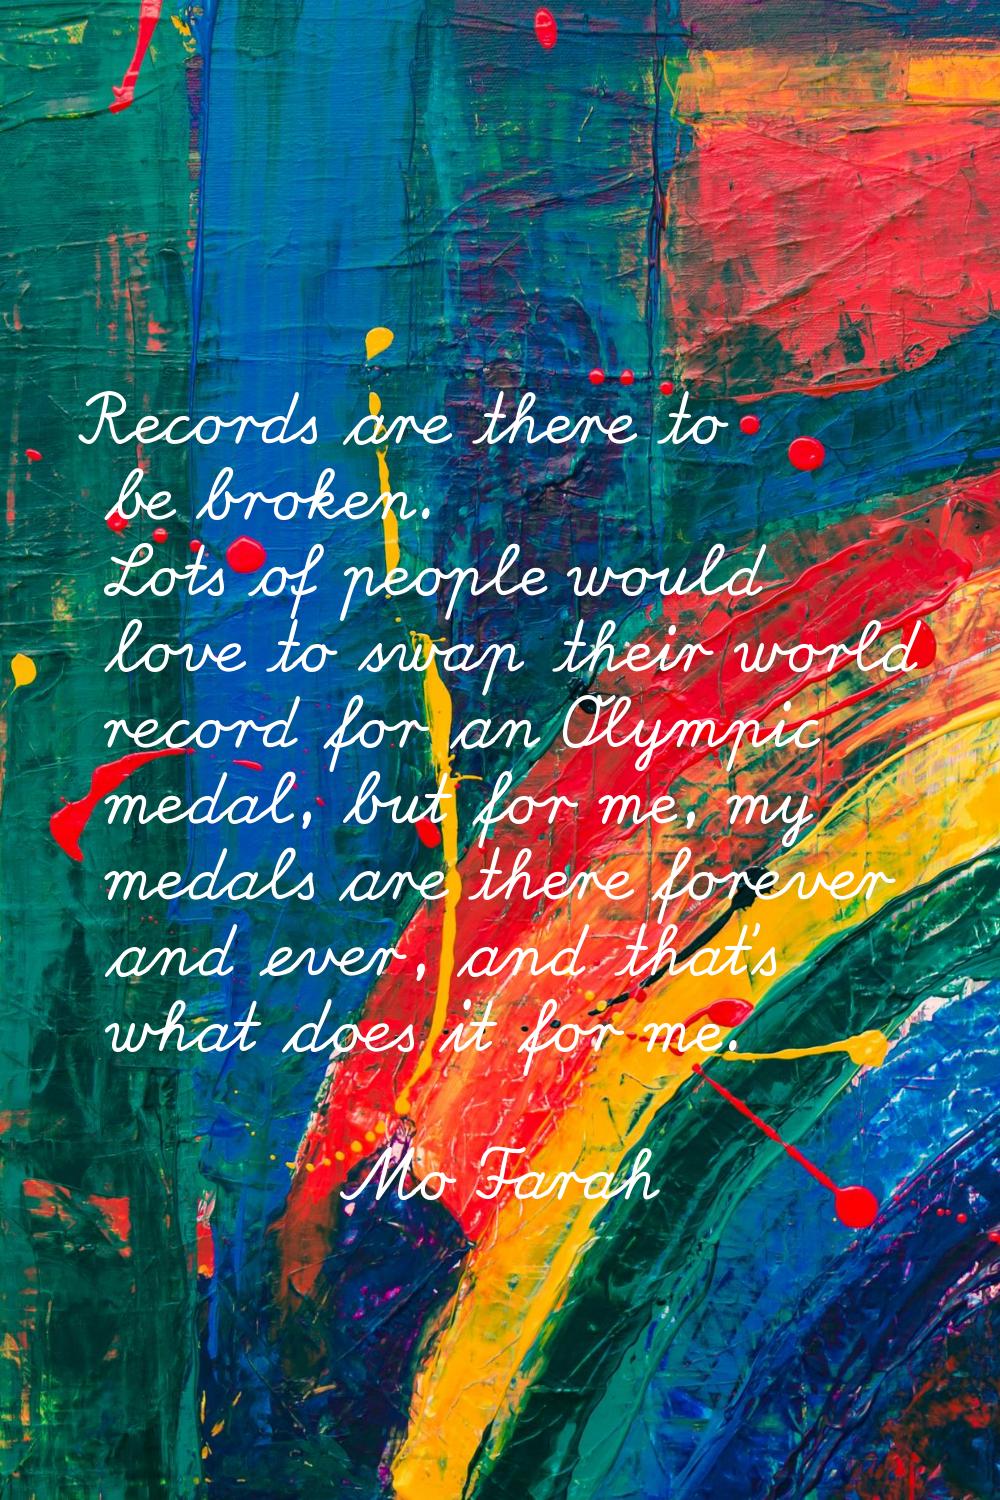 Records are there to be broken. Lots of people would love to swap their world record for an Olympic